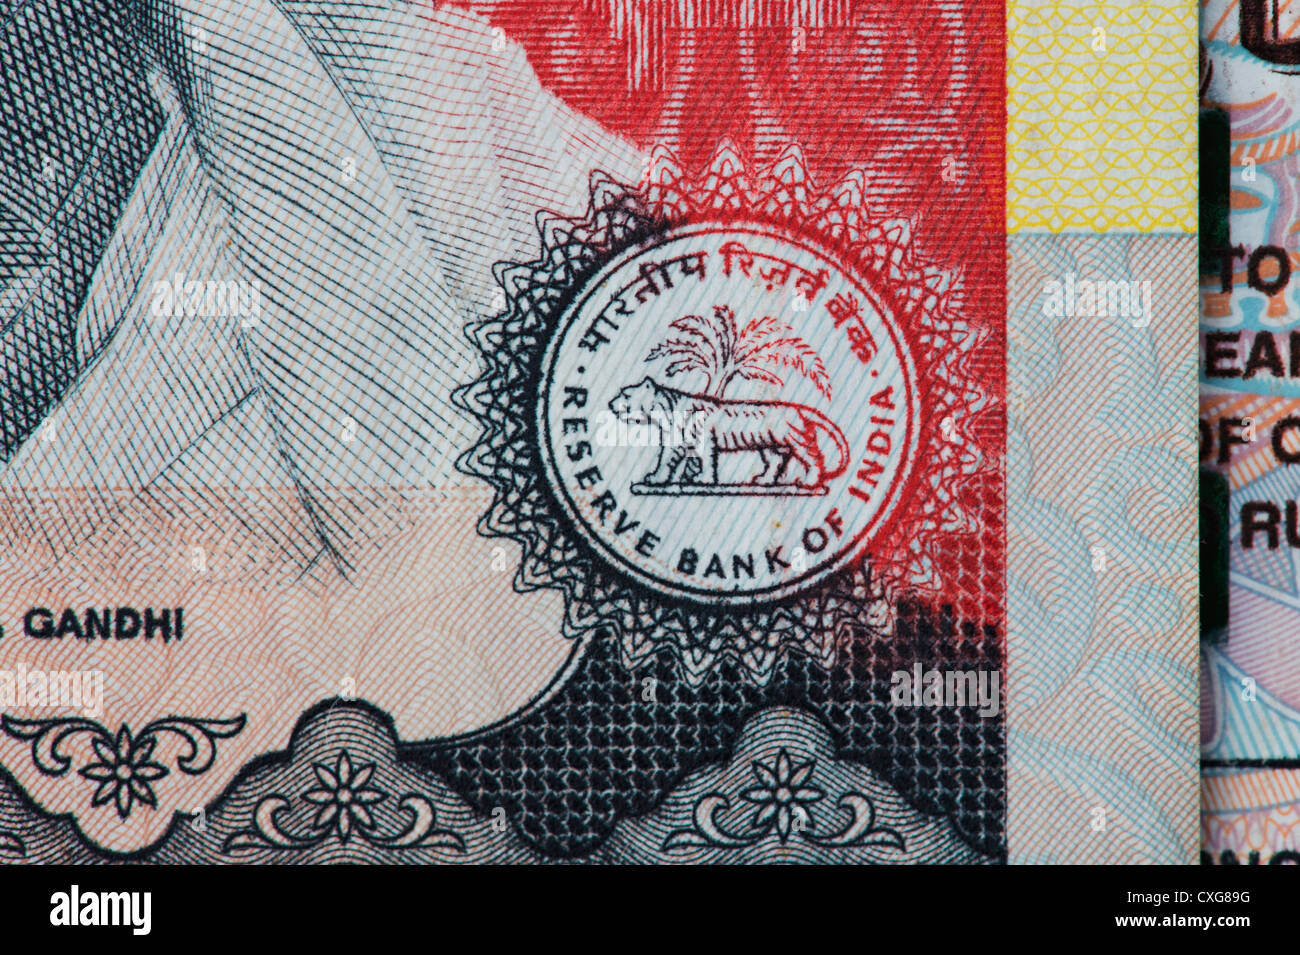 Reserve bank of india seal on an Indian thousand rupee notes Stock Photo